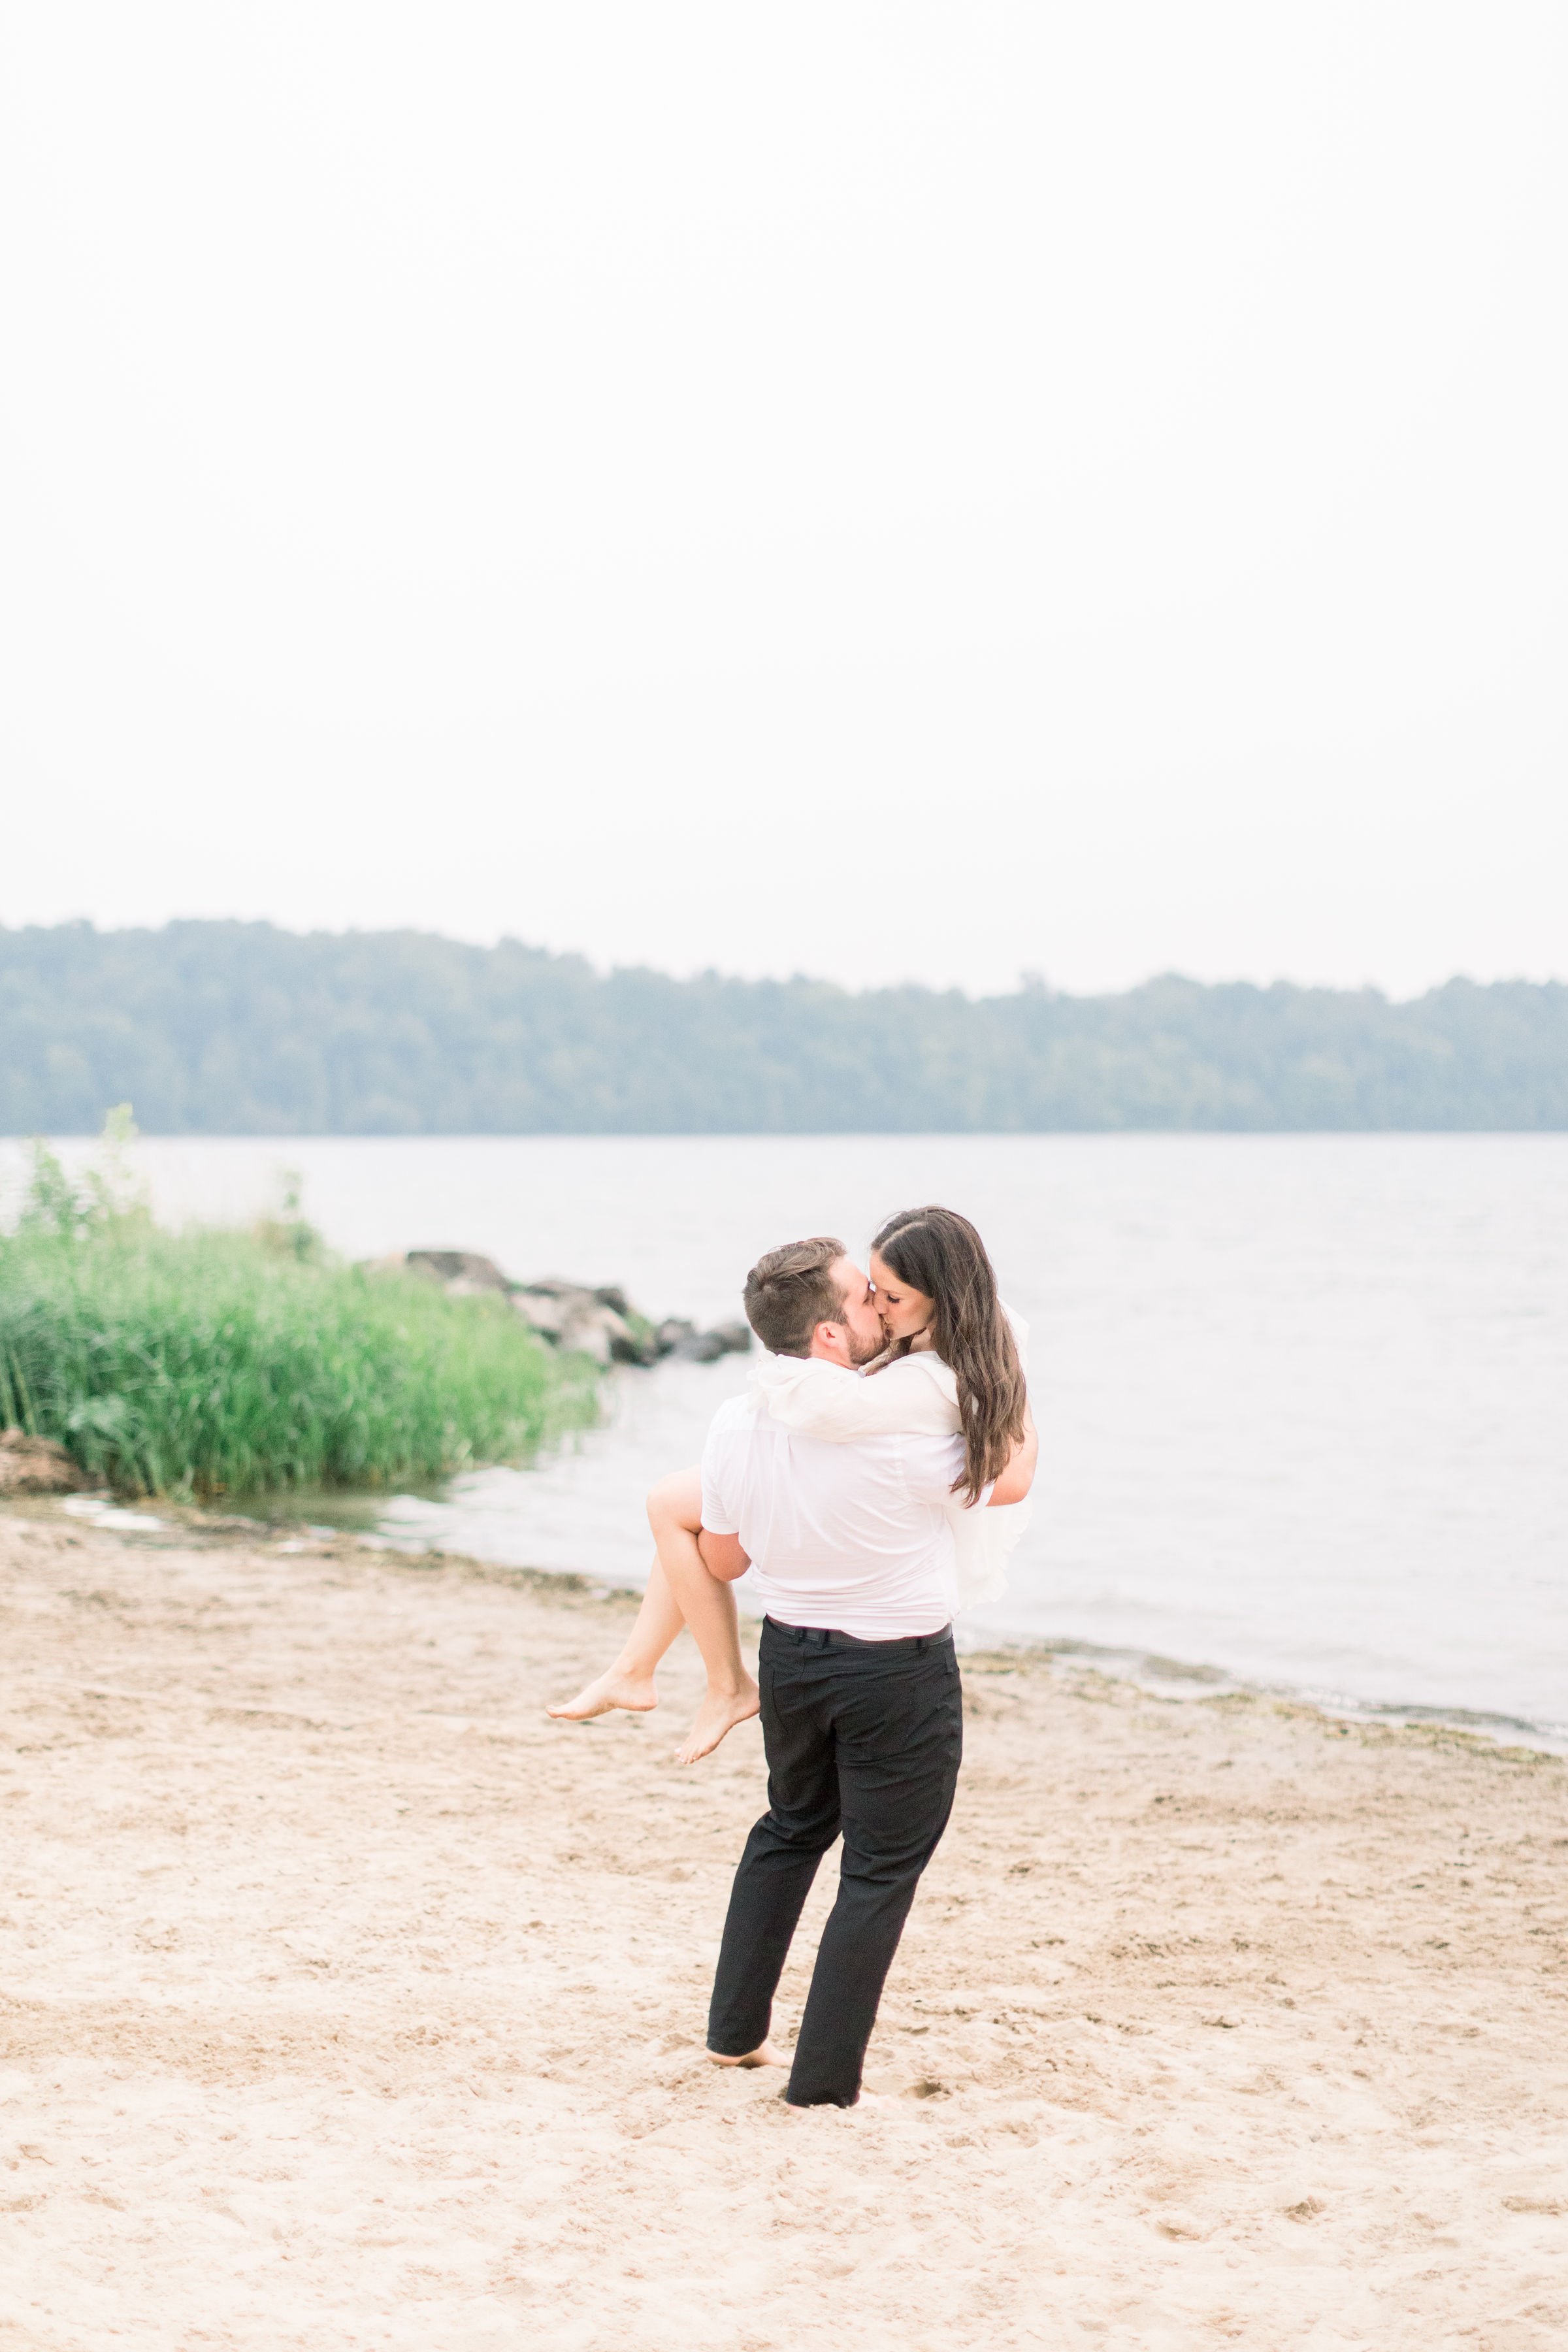  Chelsea Mason Photography captures a man carrying his fiance next to a lake at Grass Creek Park. engagement portraits lake #Kingstonengagement #GrassCreekParkPortraits #Ontarioengagementphotographers #Chelseamasonphotography #Chelseamasonengagements